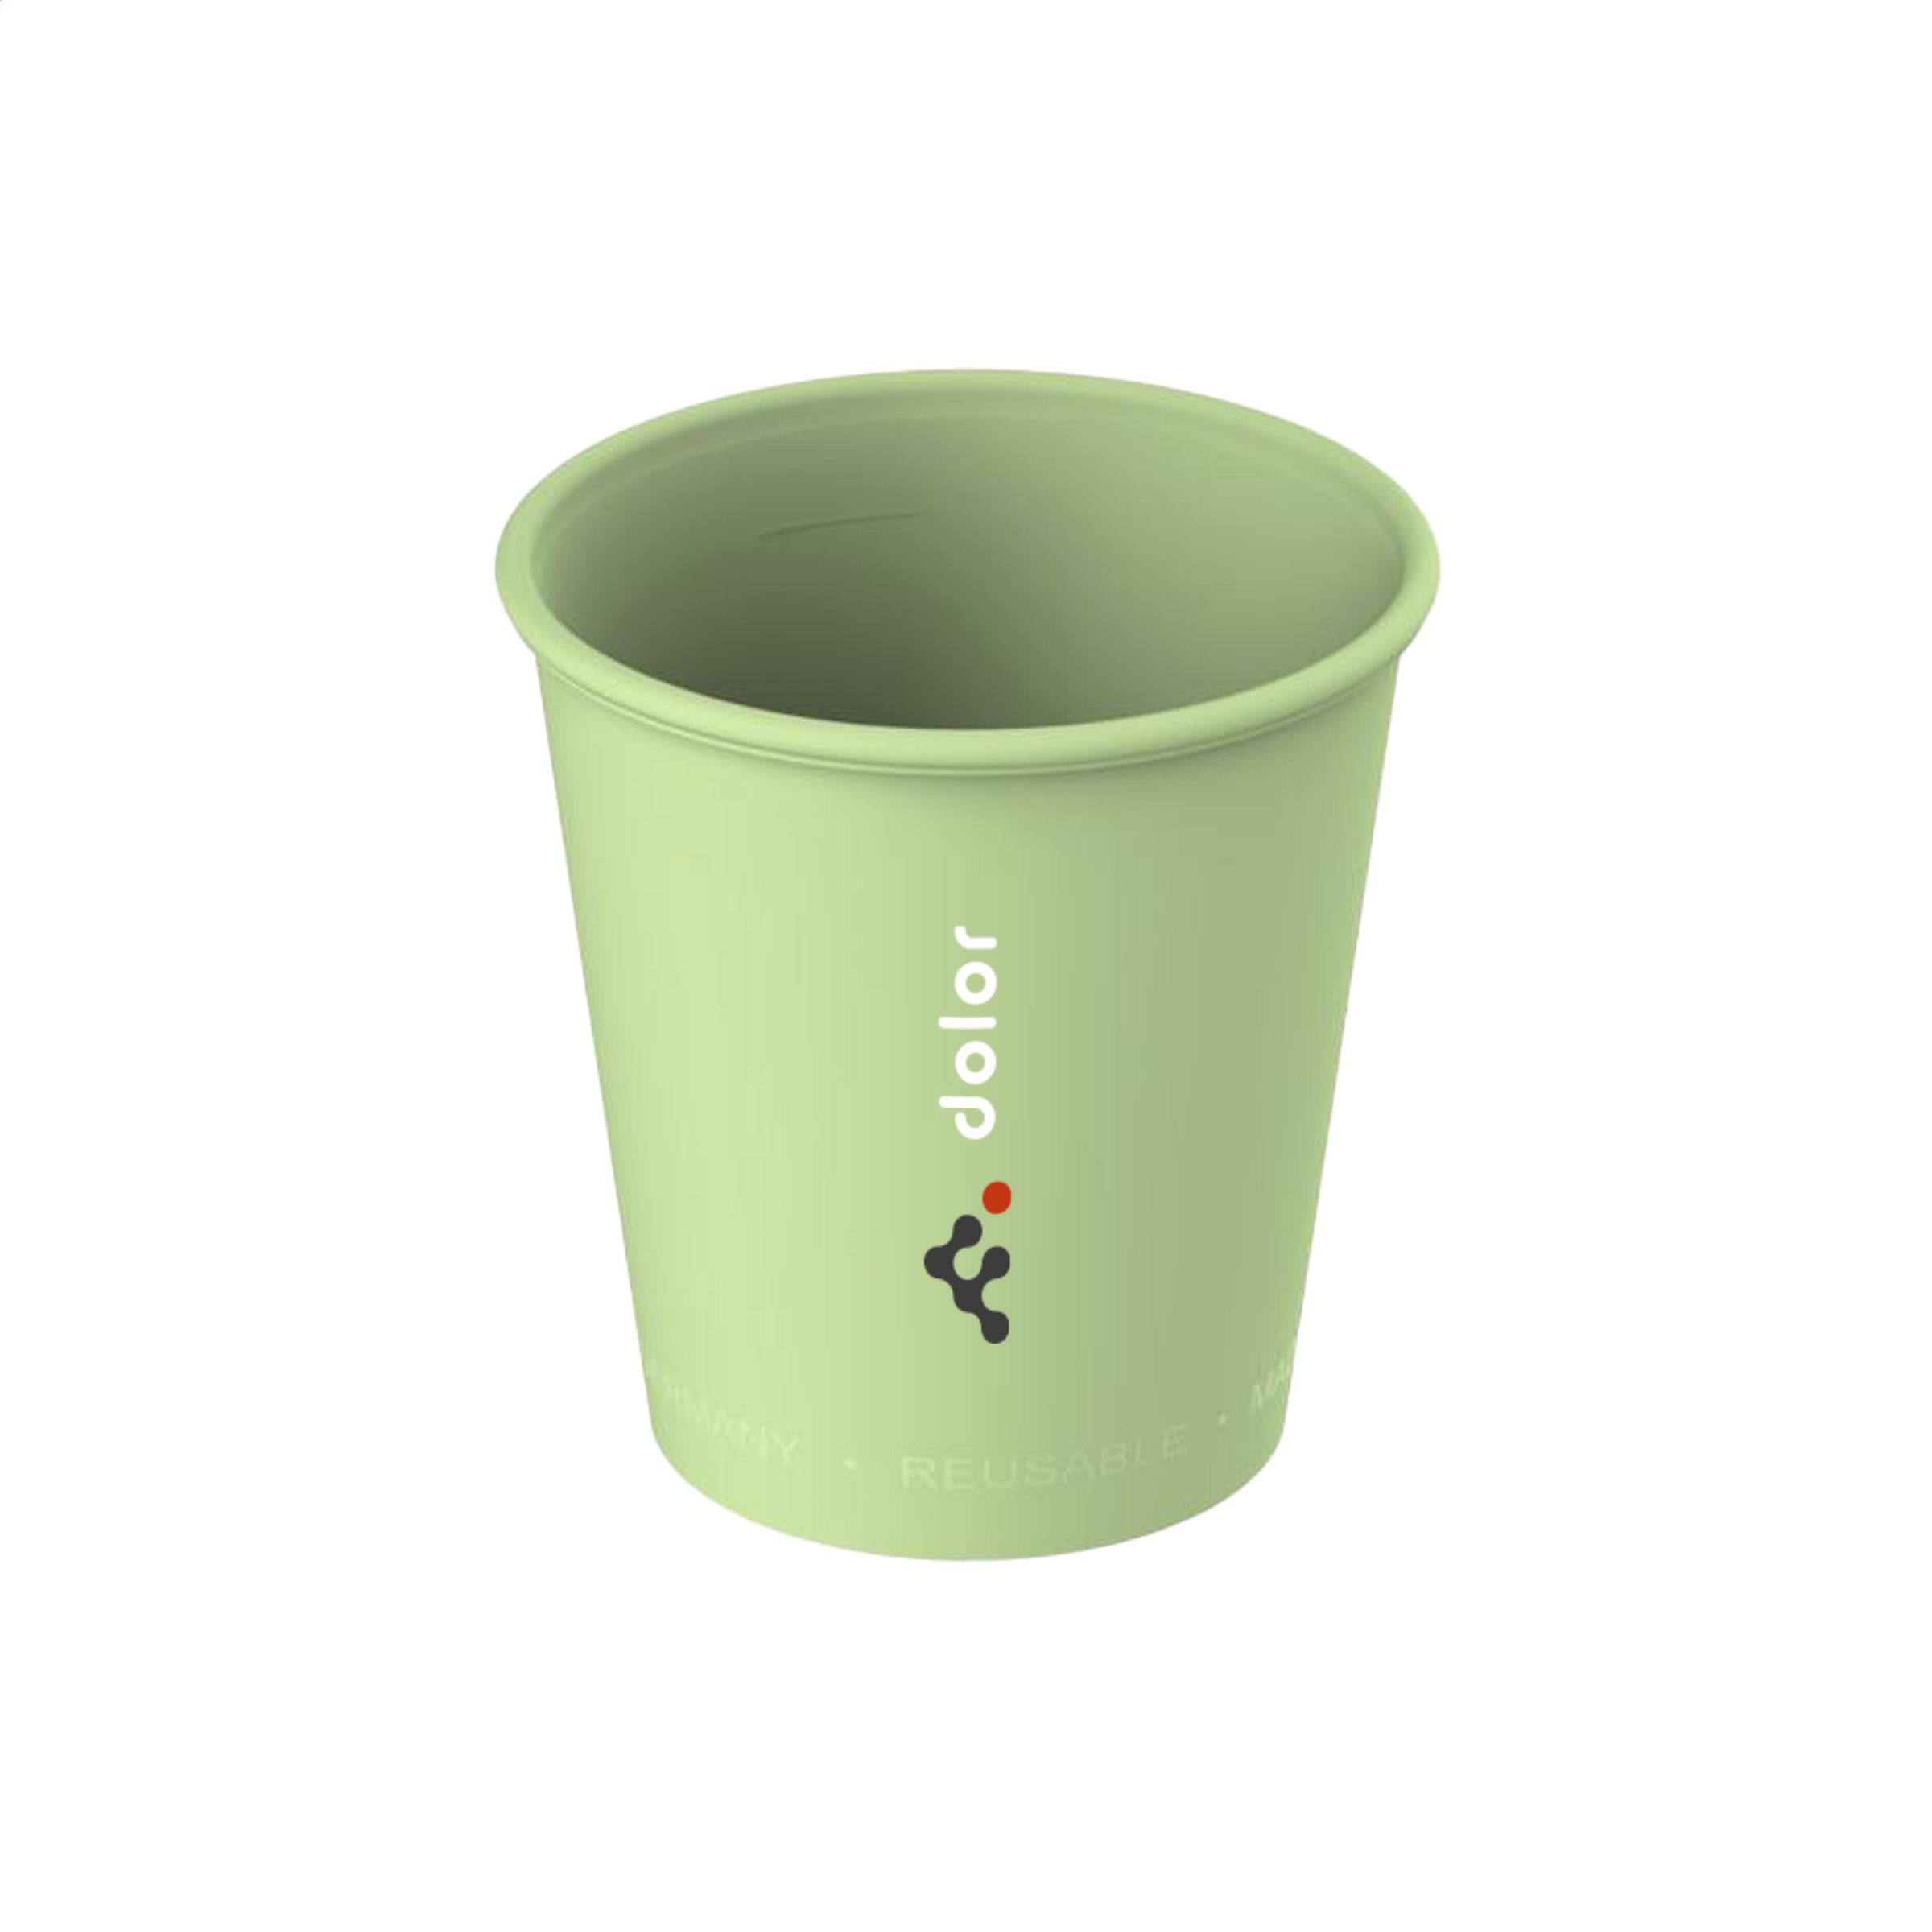 Reusable Plastic Drinking Cup - Canford Cliffs